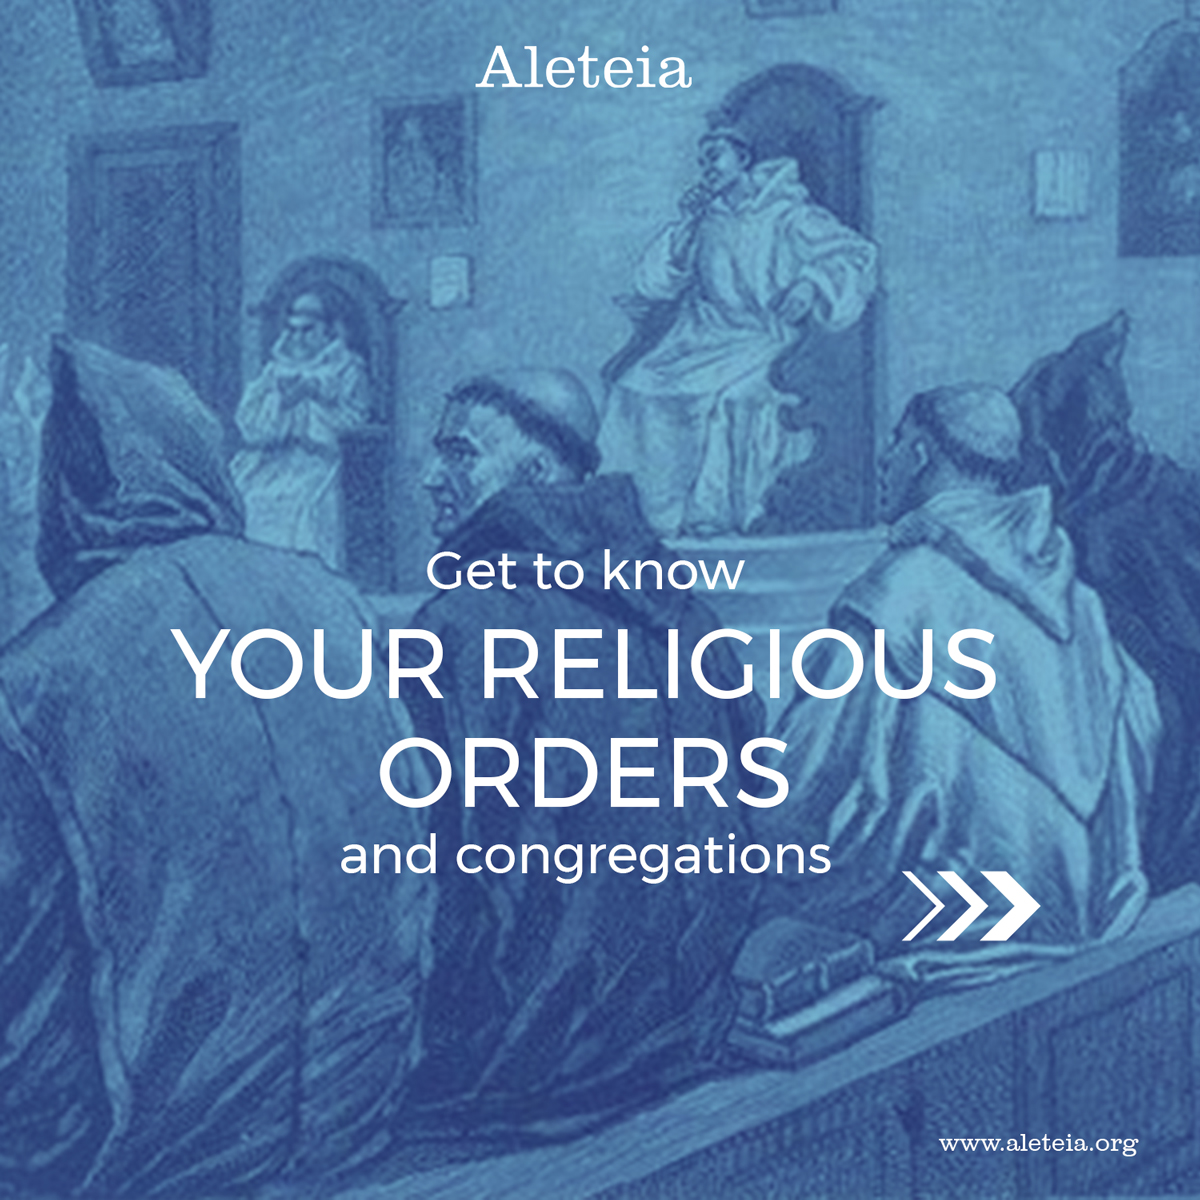 RELIGIOUS ORDERS GUIDE